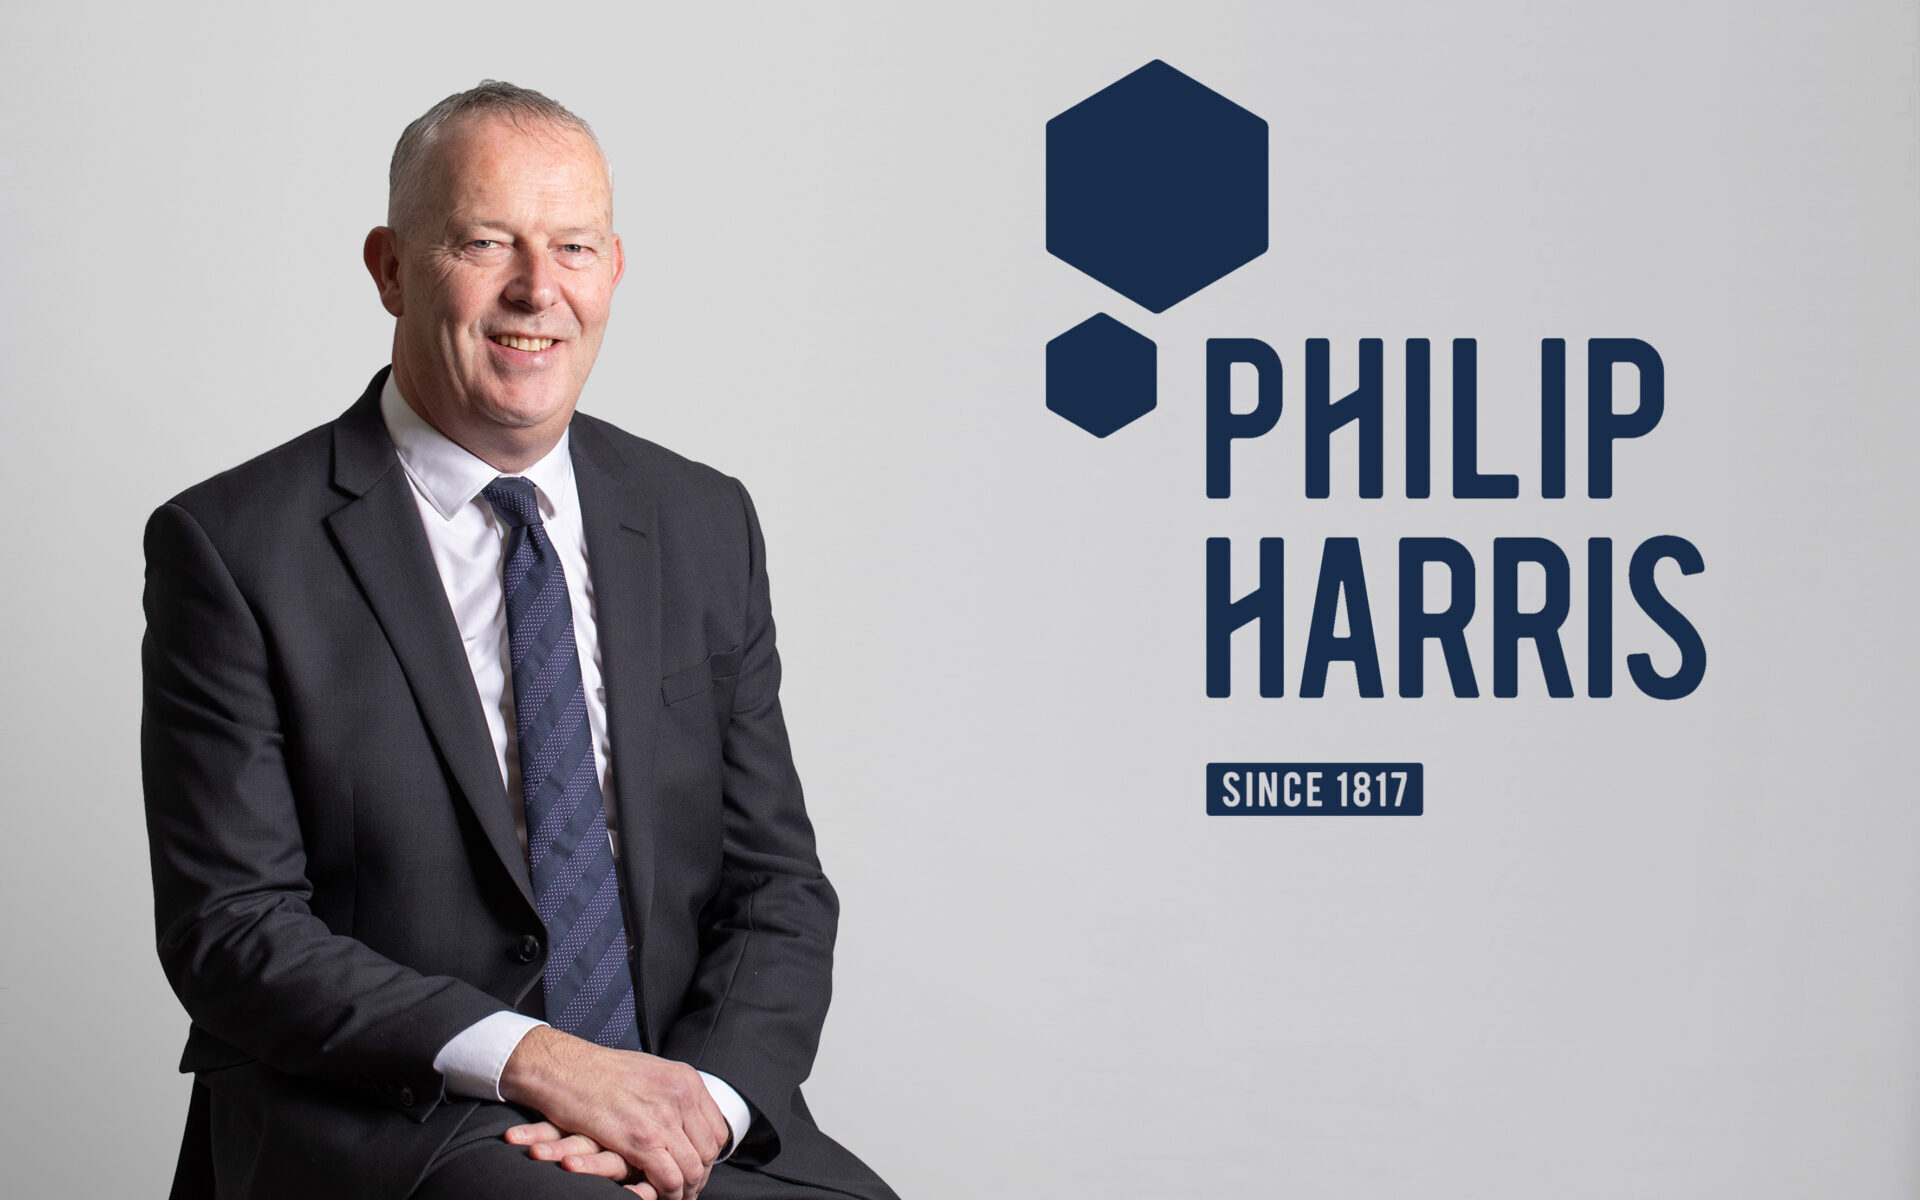 Science Education Resources Supplier Philip Harris Announces Rebrand and New Ecommerce Site to Expand Offer For Educators